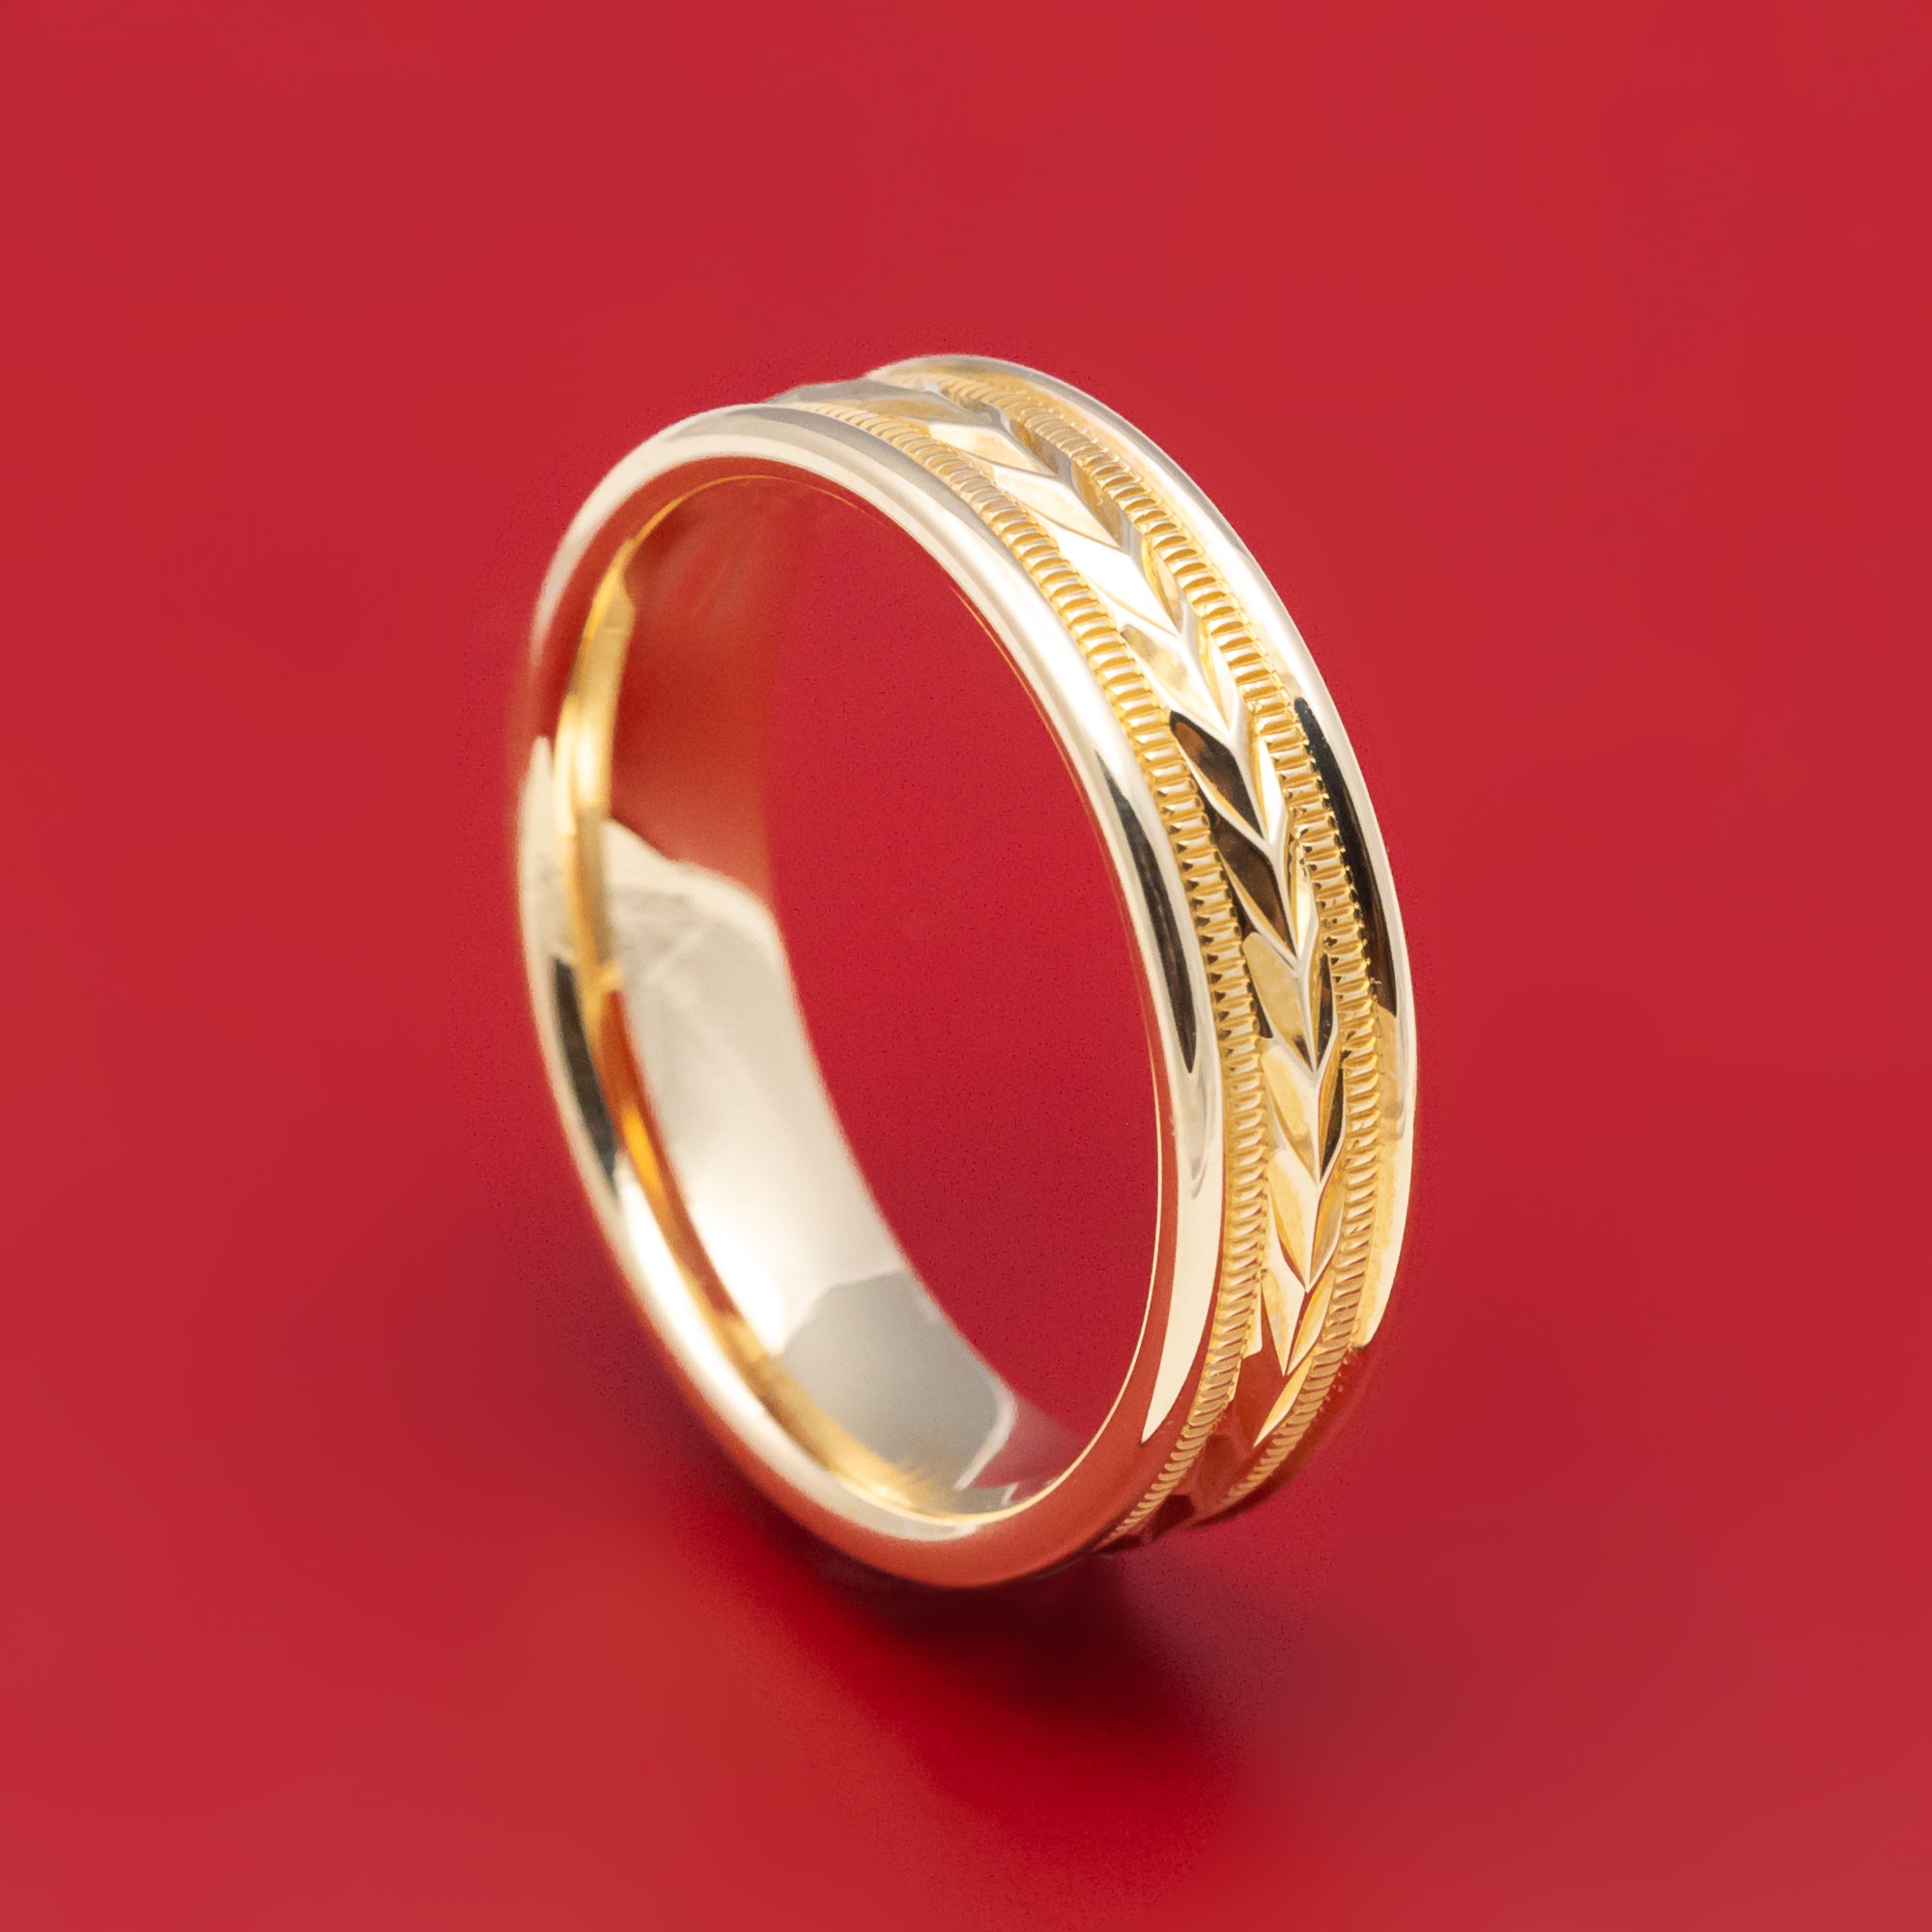 Gents Gold Wedding Ring Celtic Knot Design | Bridal Jewelry